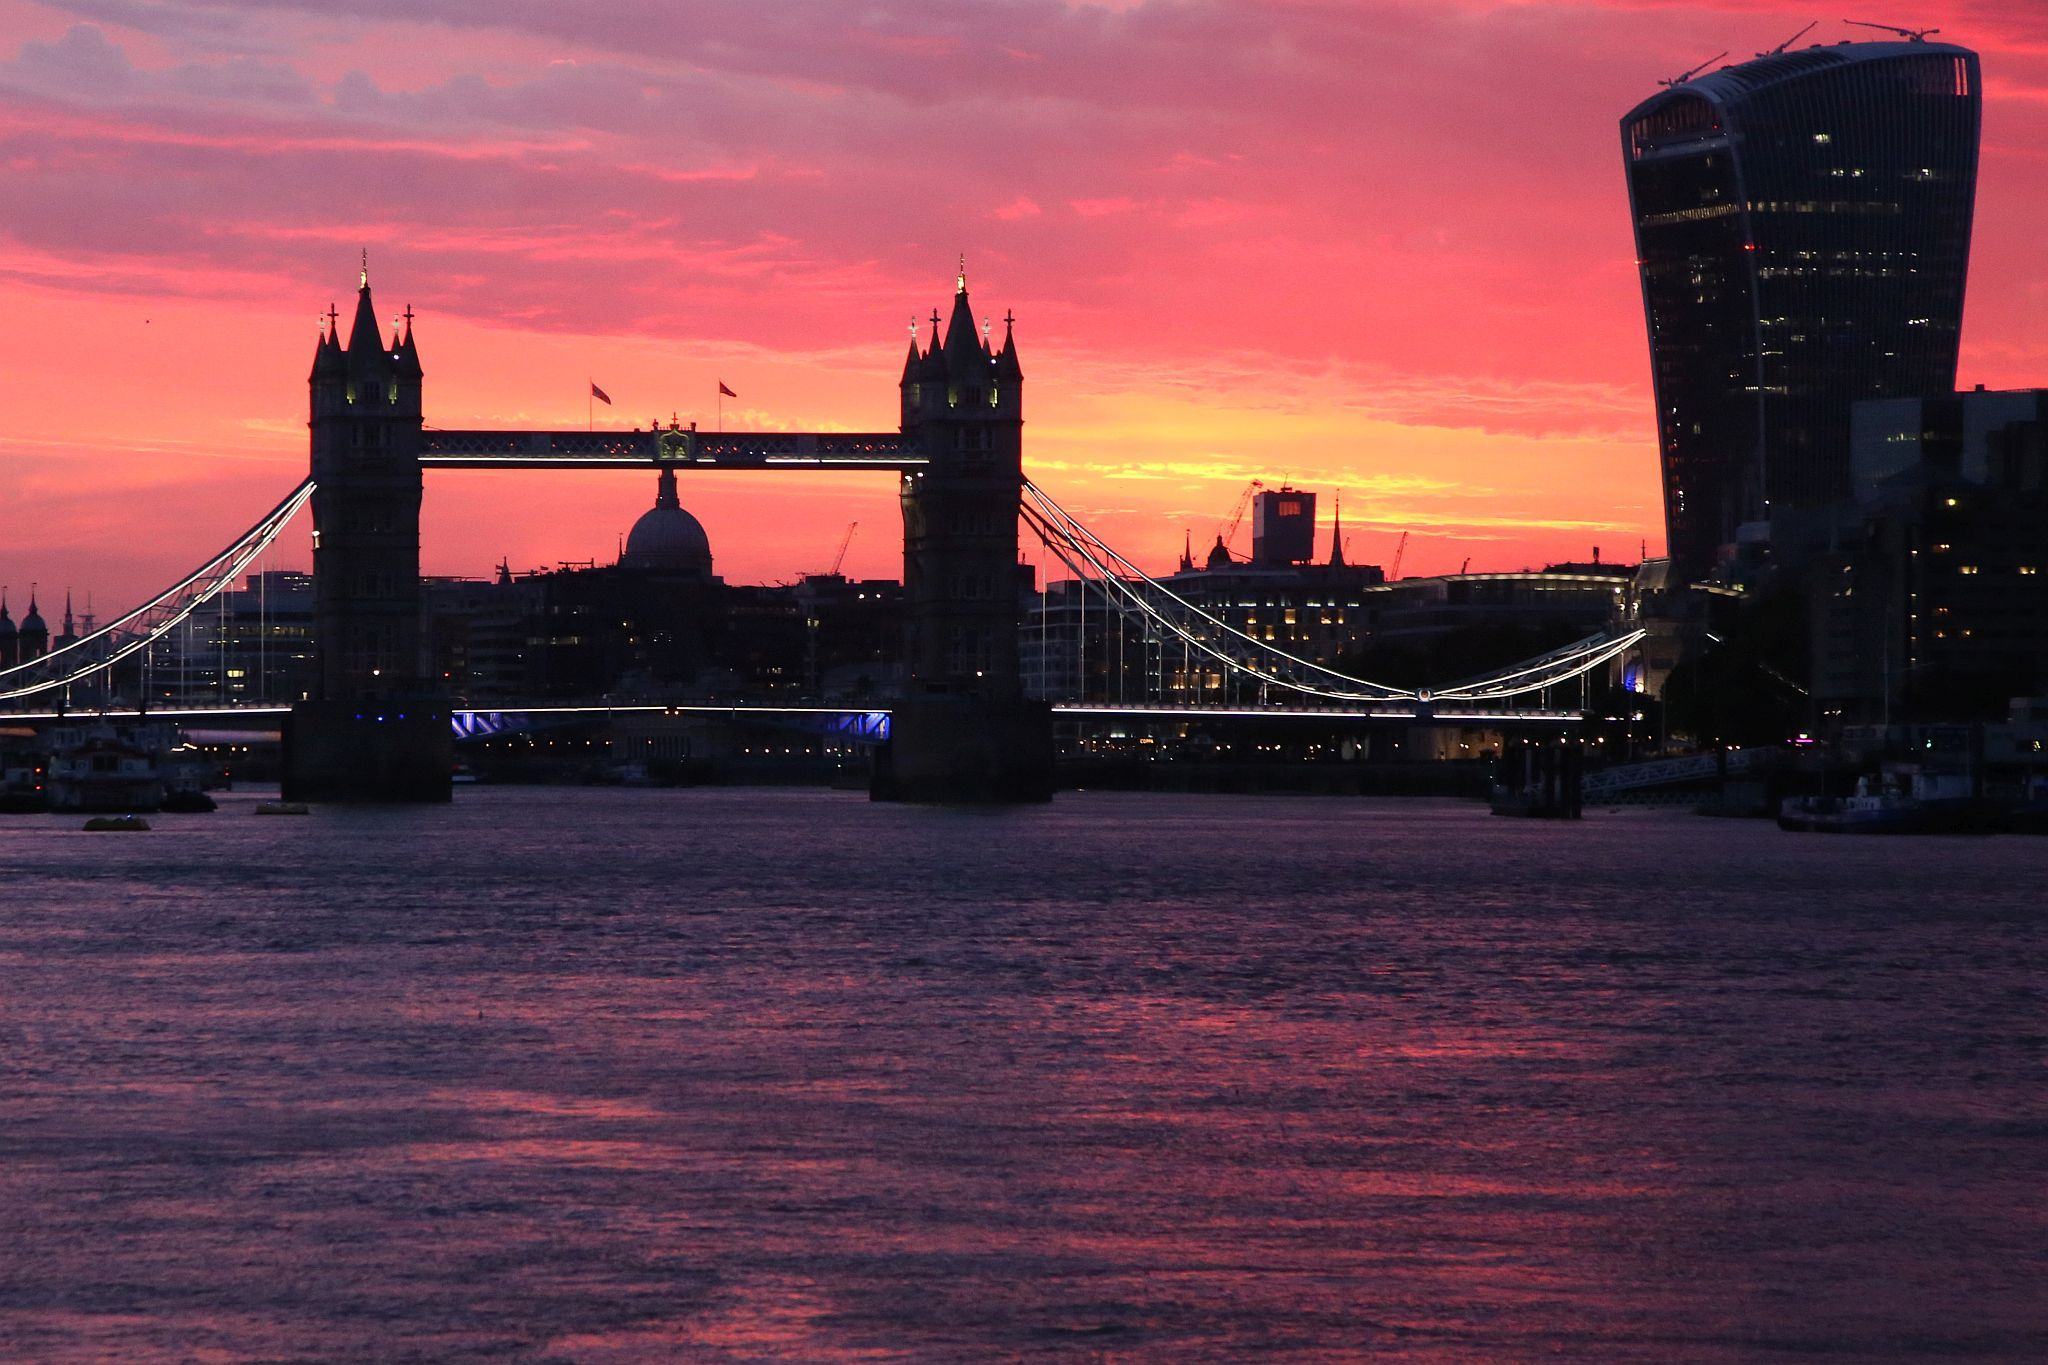 Tower Bridge, on the River Thames in London, at sunset. 31-Jul-2021.